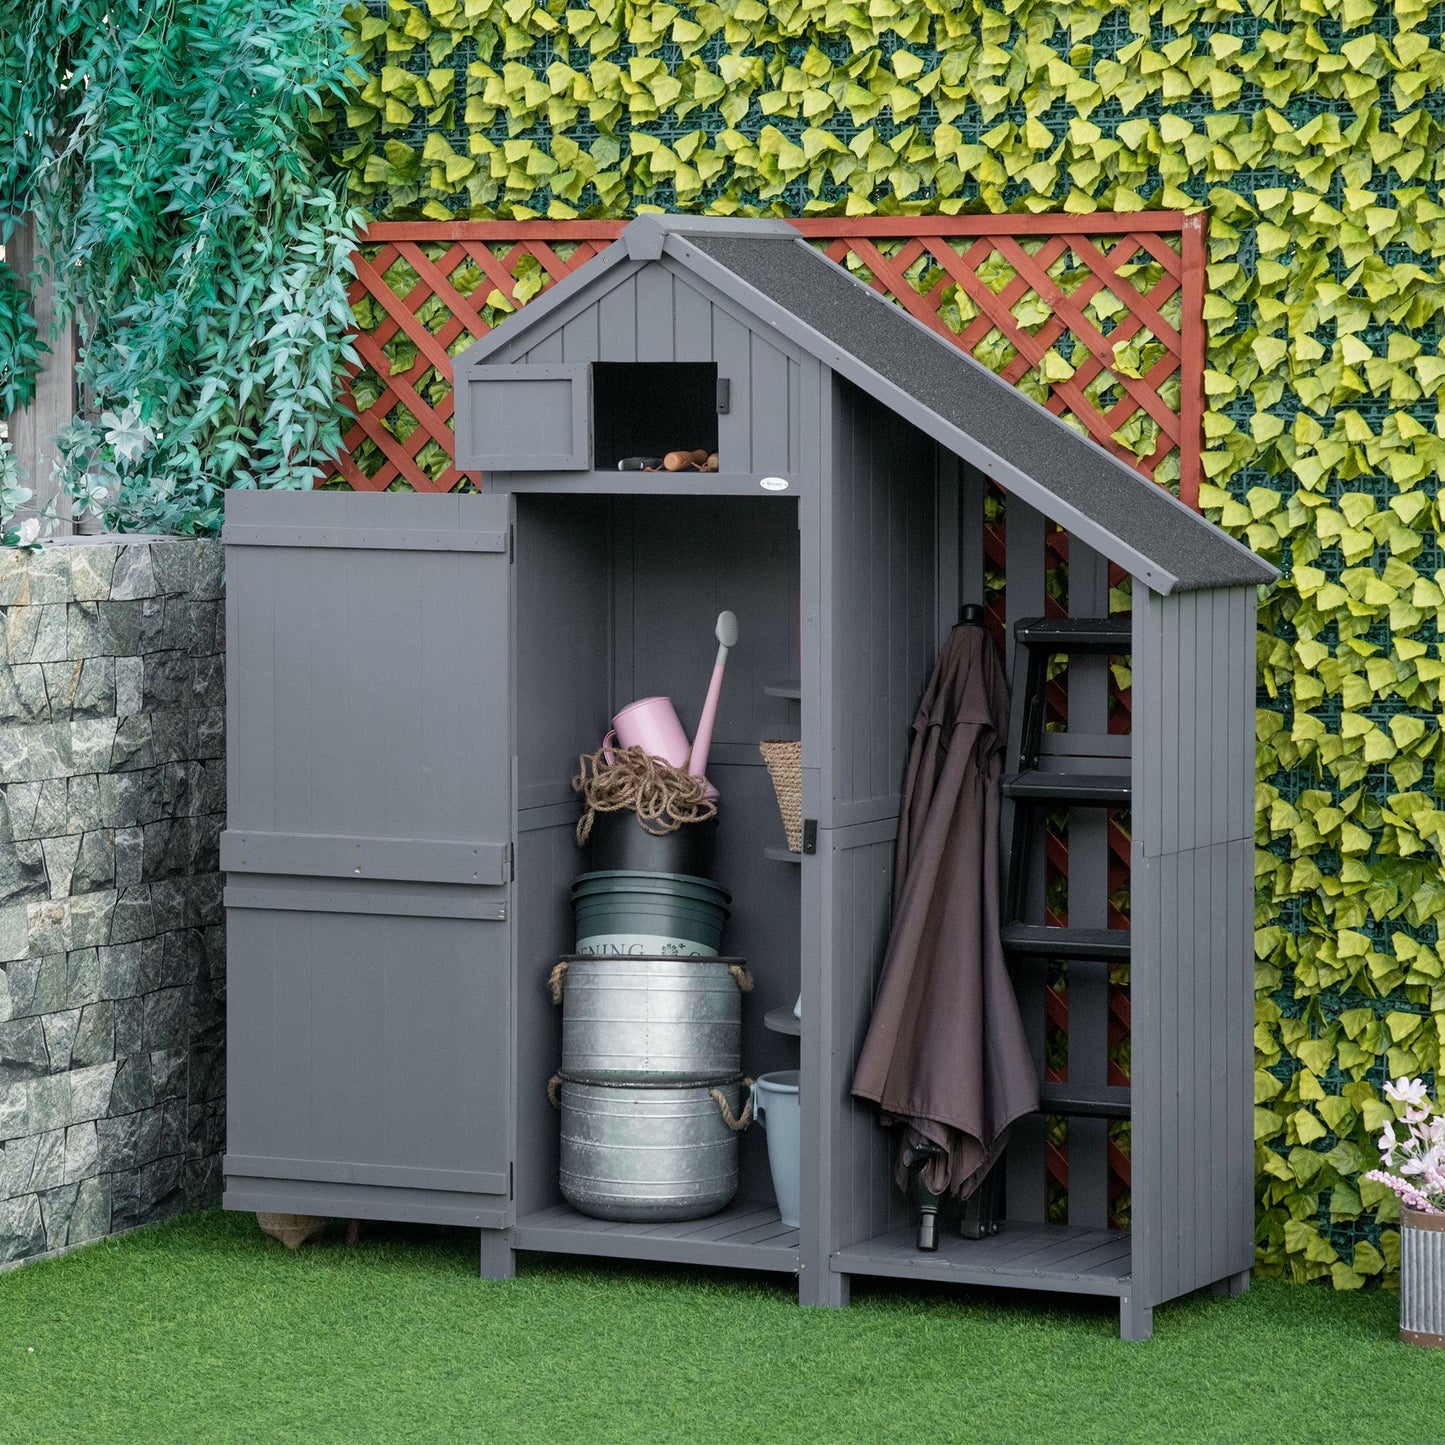 Outsunny Garden Outdoor Storage Shed Outdoor Tool Shed with 3 Shelves and Tilt Roof, 129x51.5x180cm, Grey